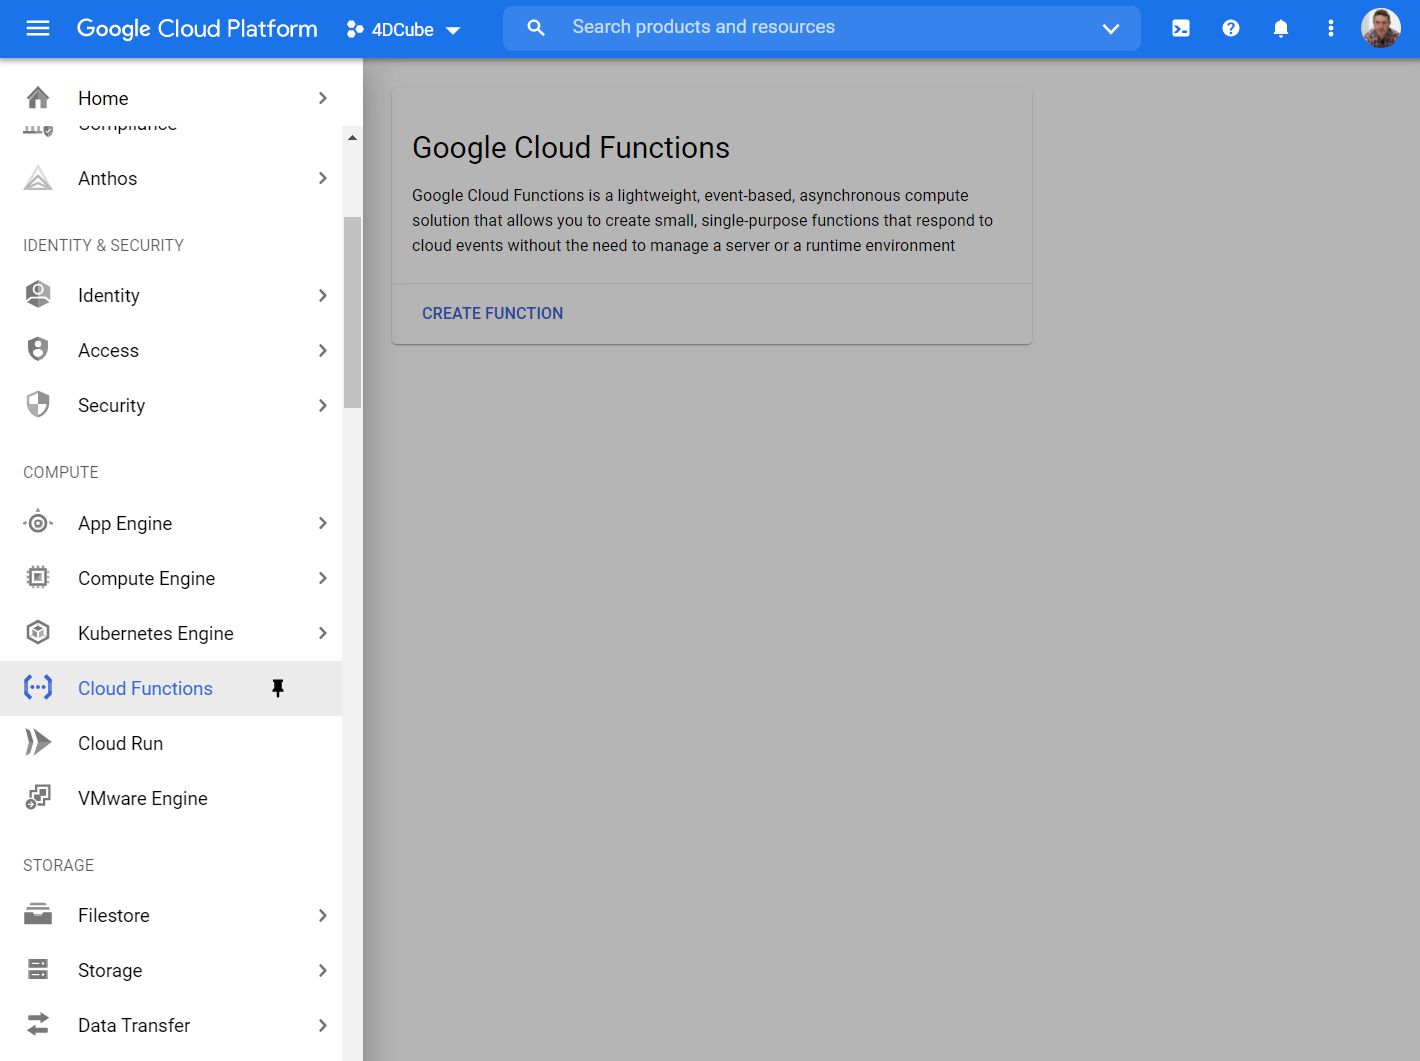 Google Cloud interface, find Cloud Functions in the menu and create a new function to get started